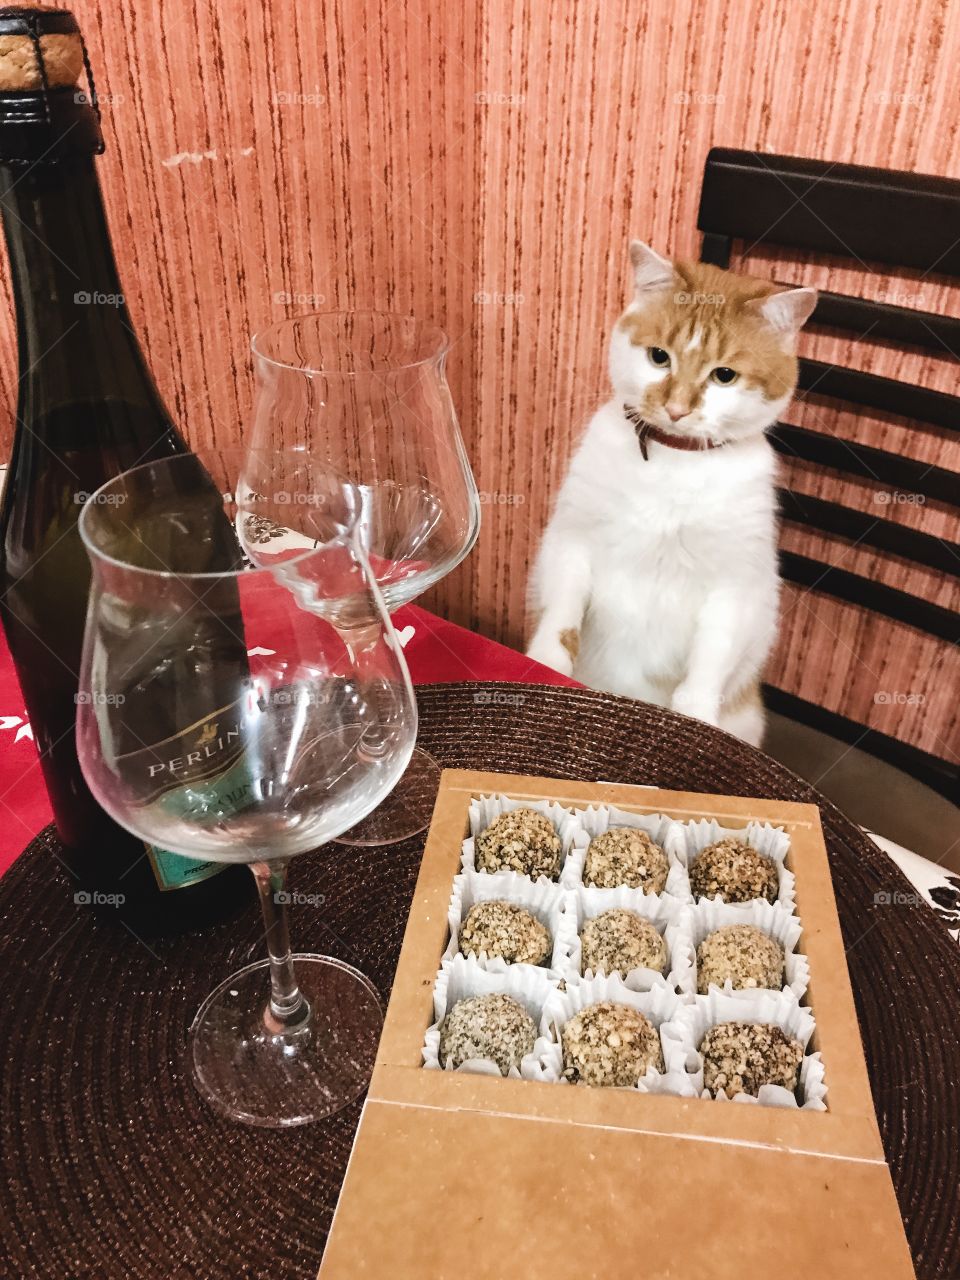 Dinner with cat